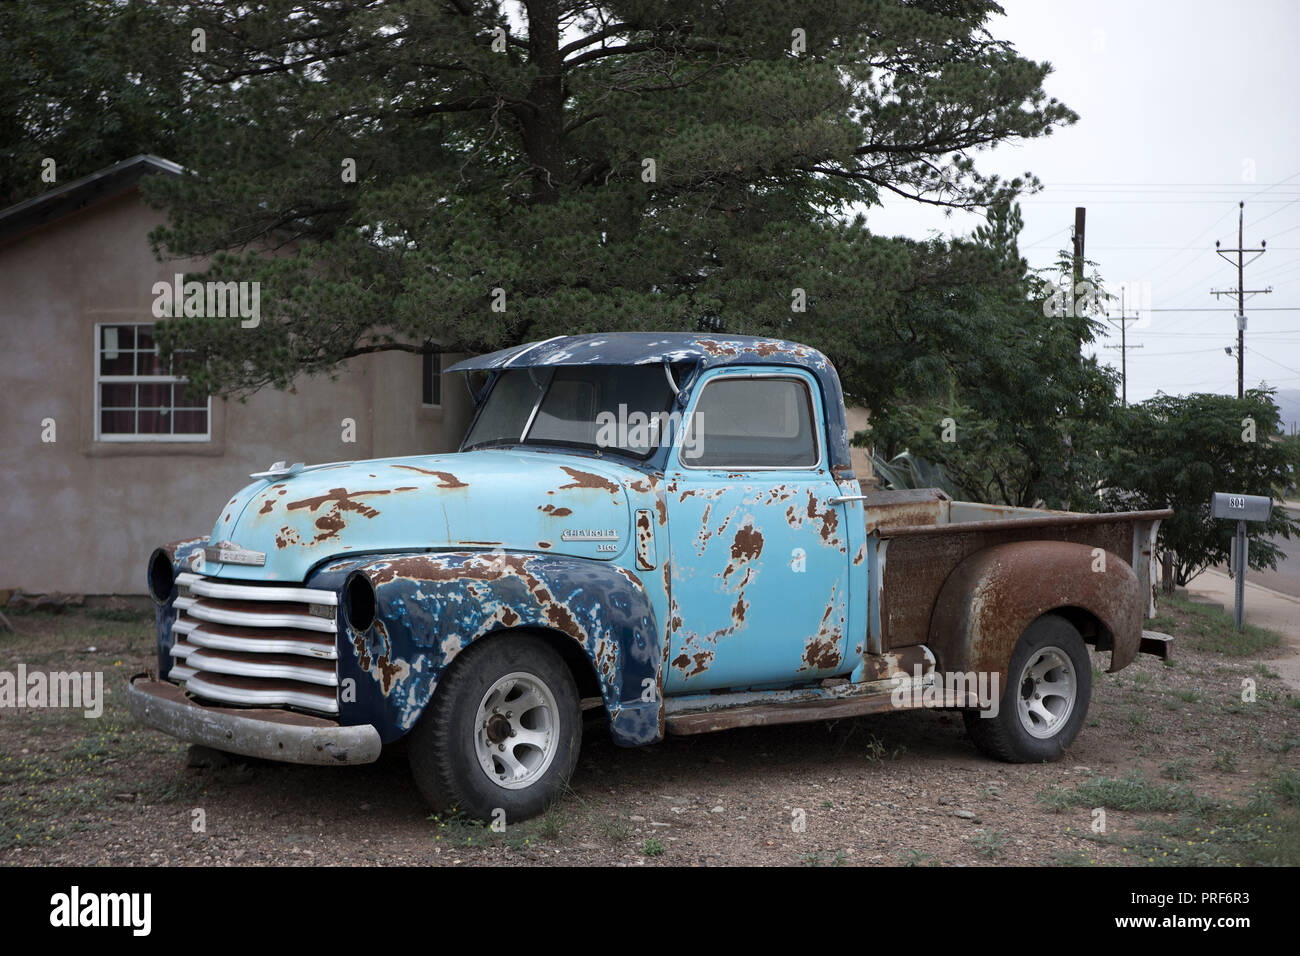 Old Chevrolet Trucks from the 1950s in Alpine, Texas. Stock Photo